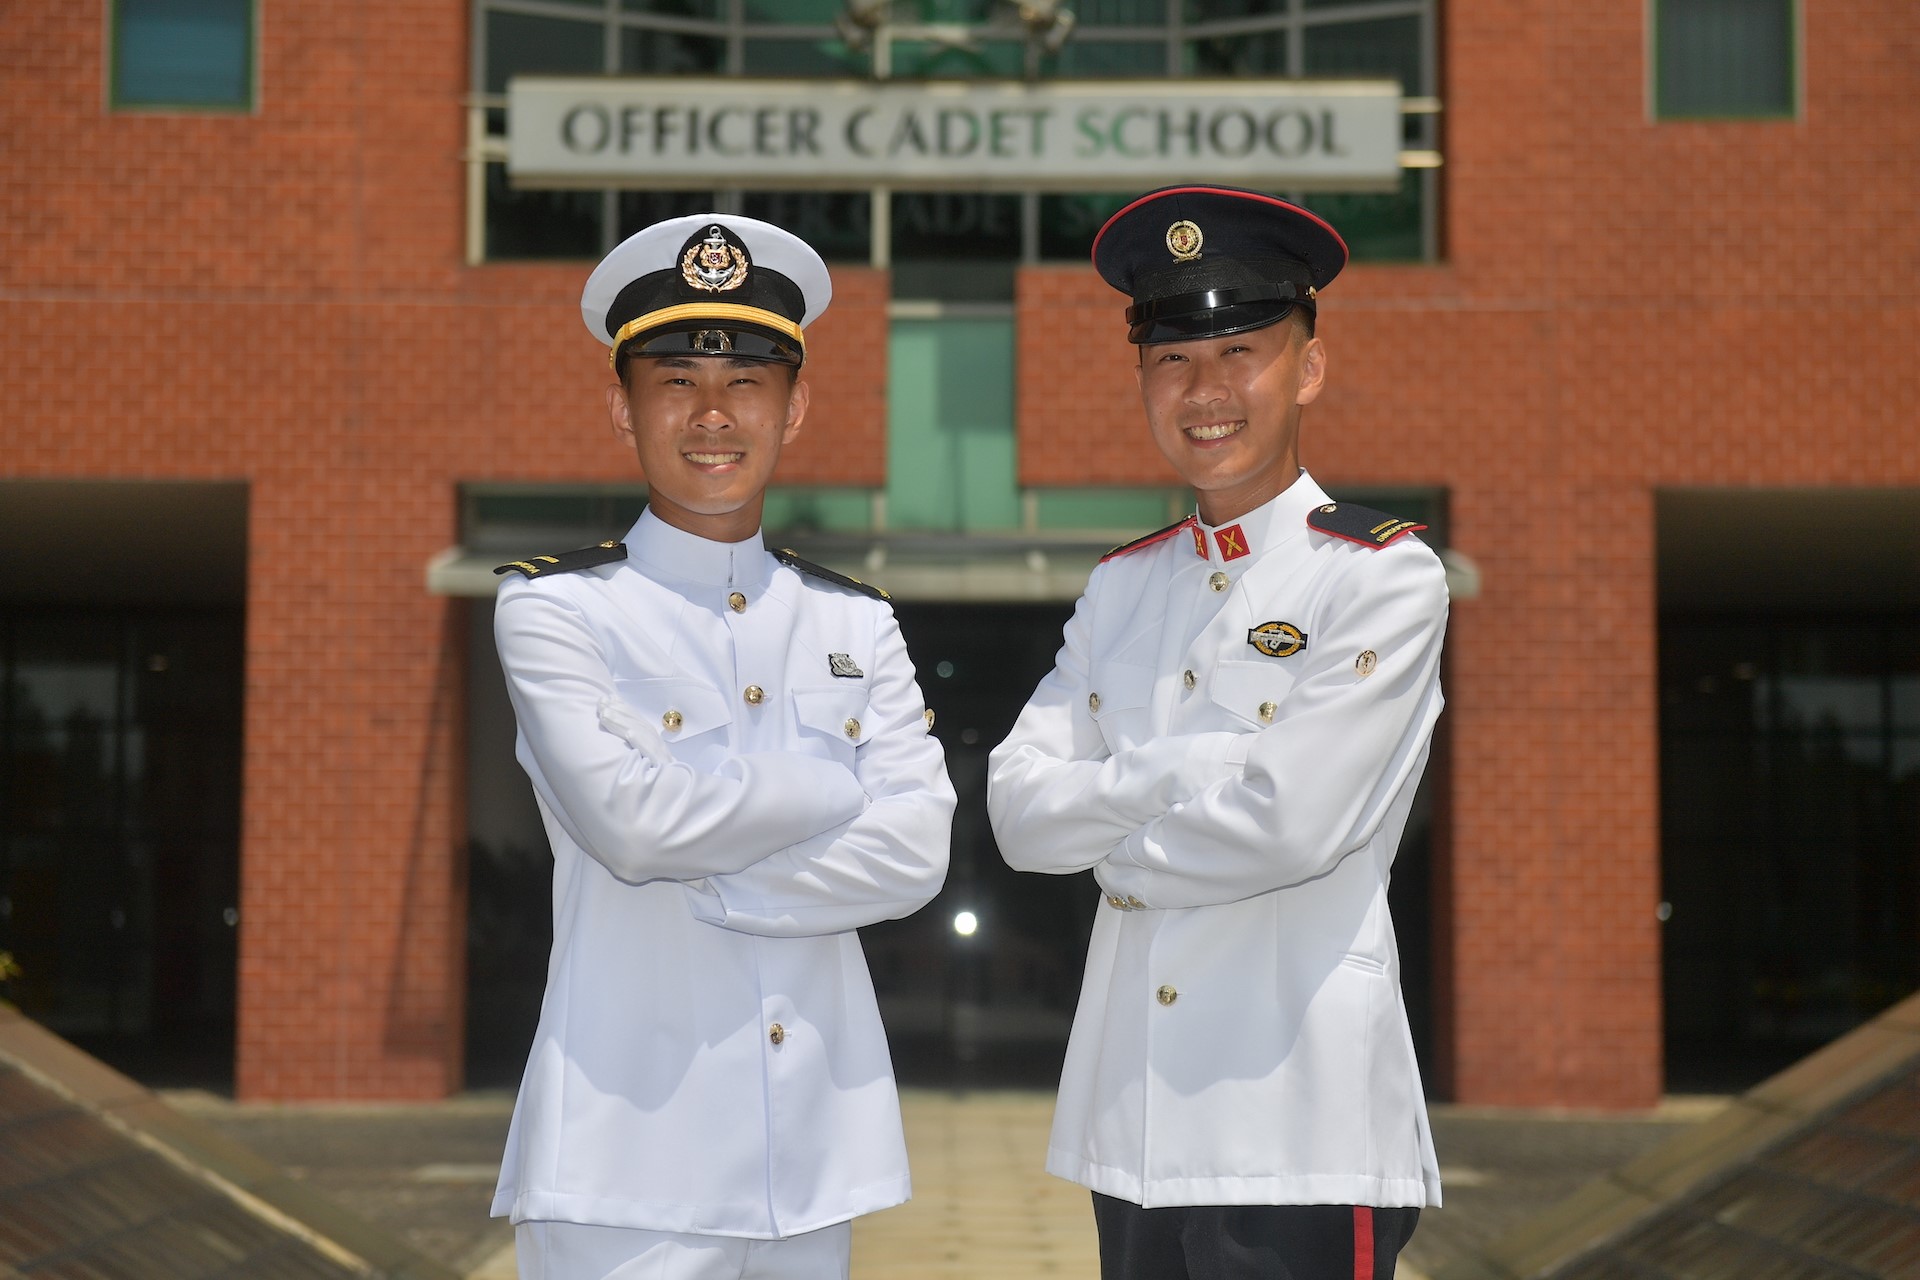 Twins commissioned among 417 cadets in first full OCS parade since COVID-19